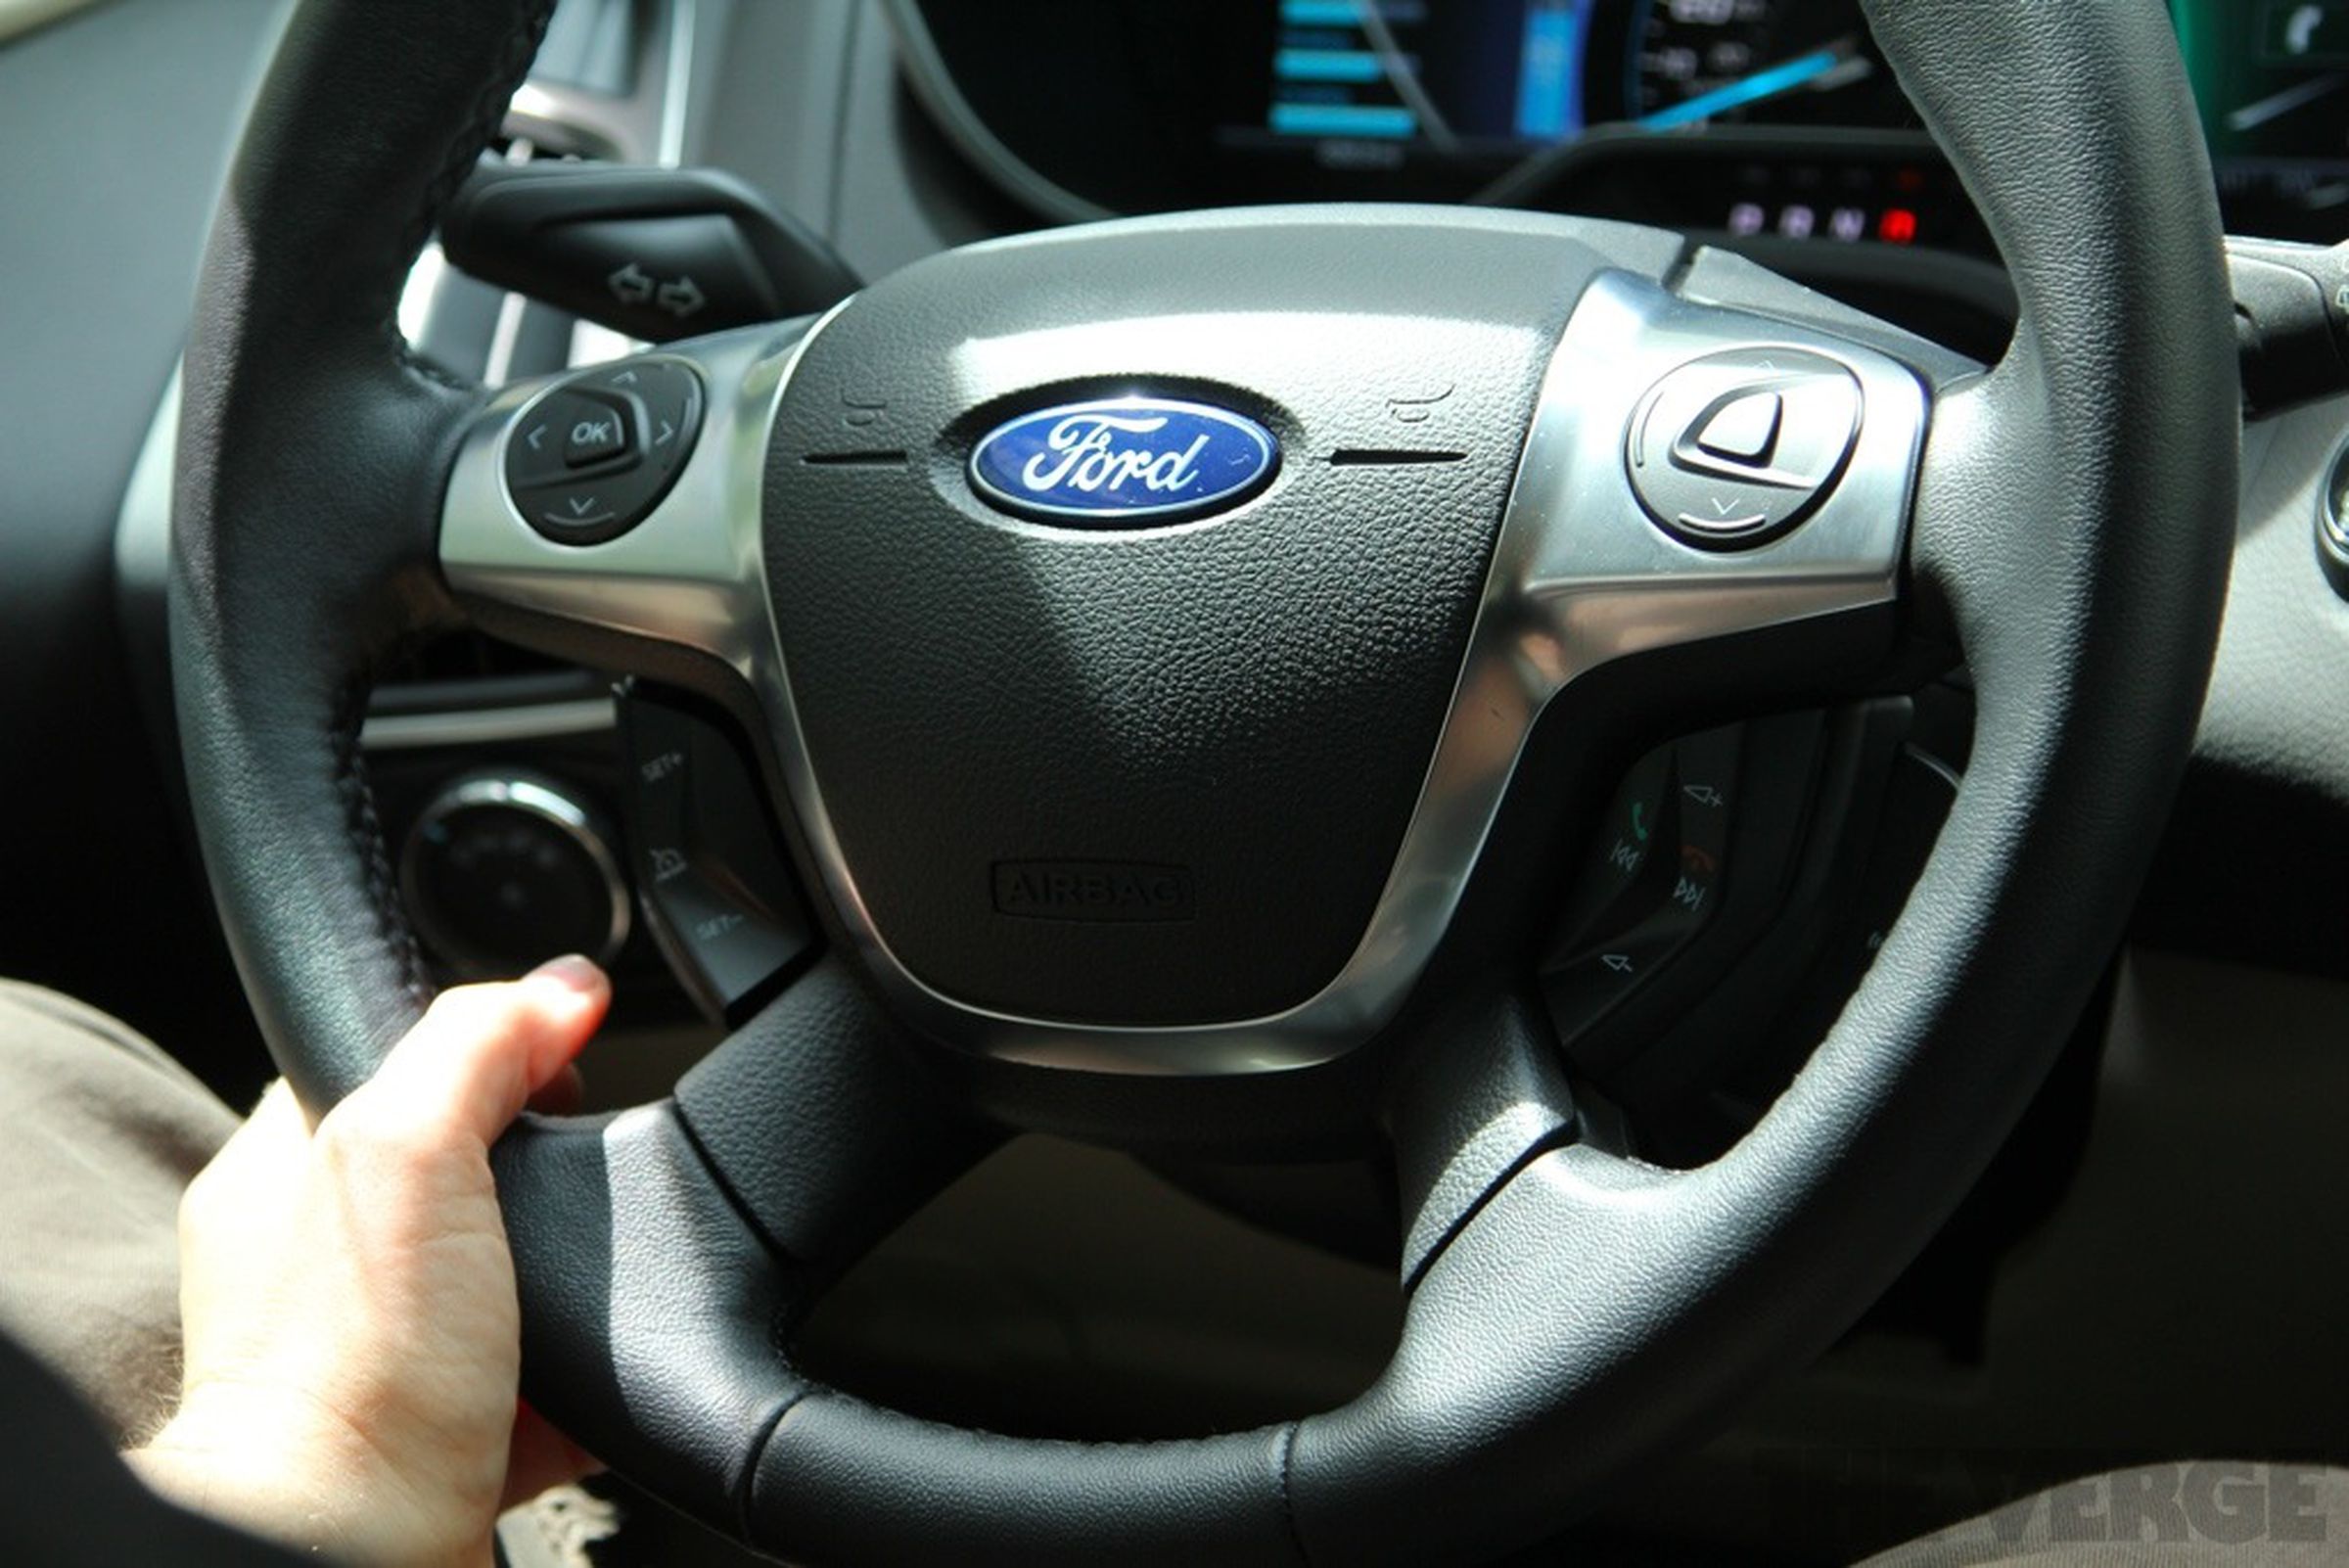 Ford Focus Electric test drive pictures